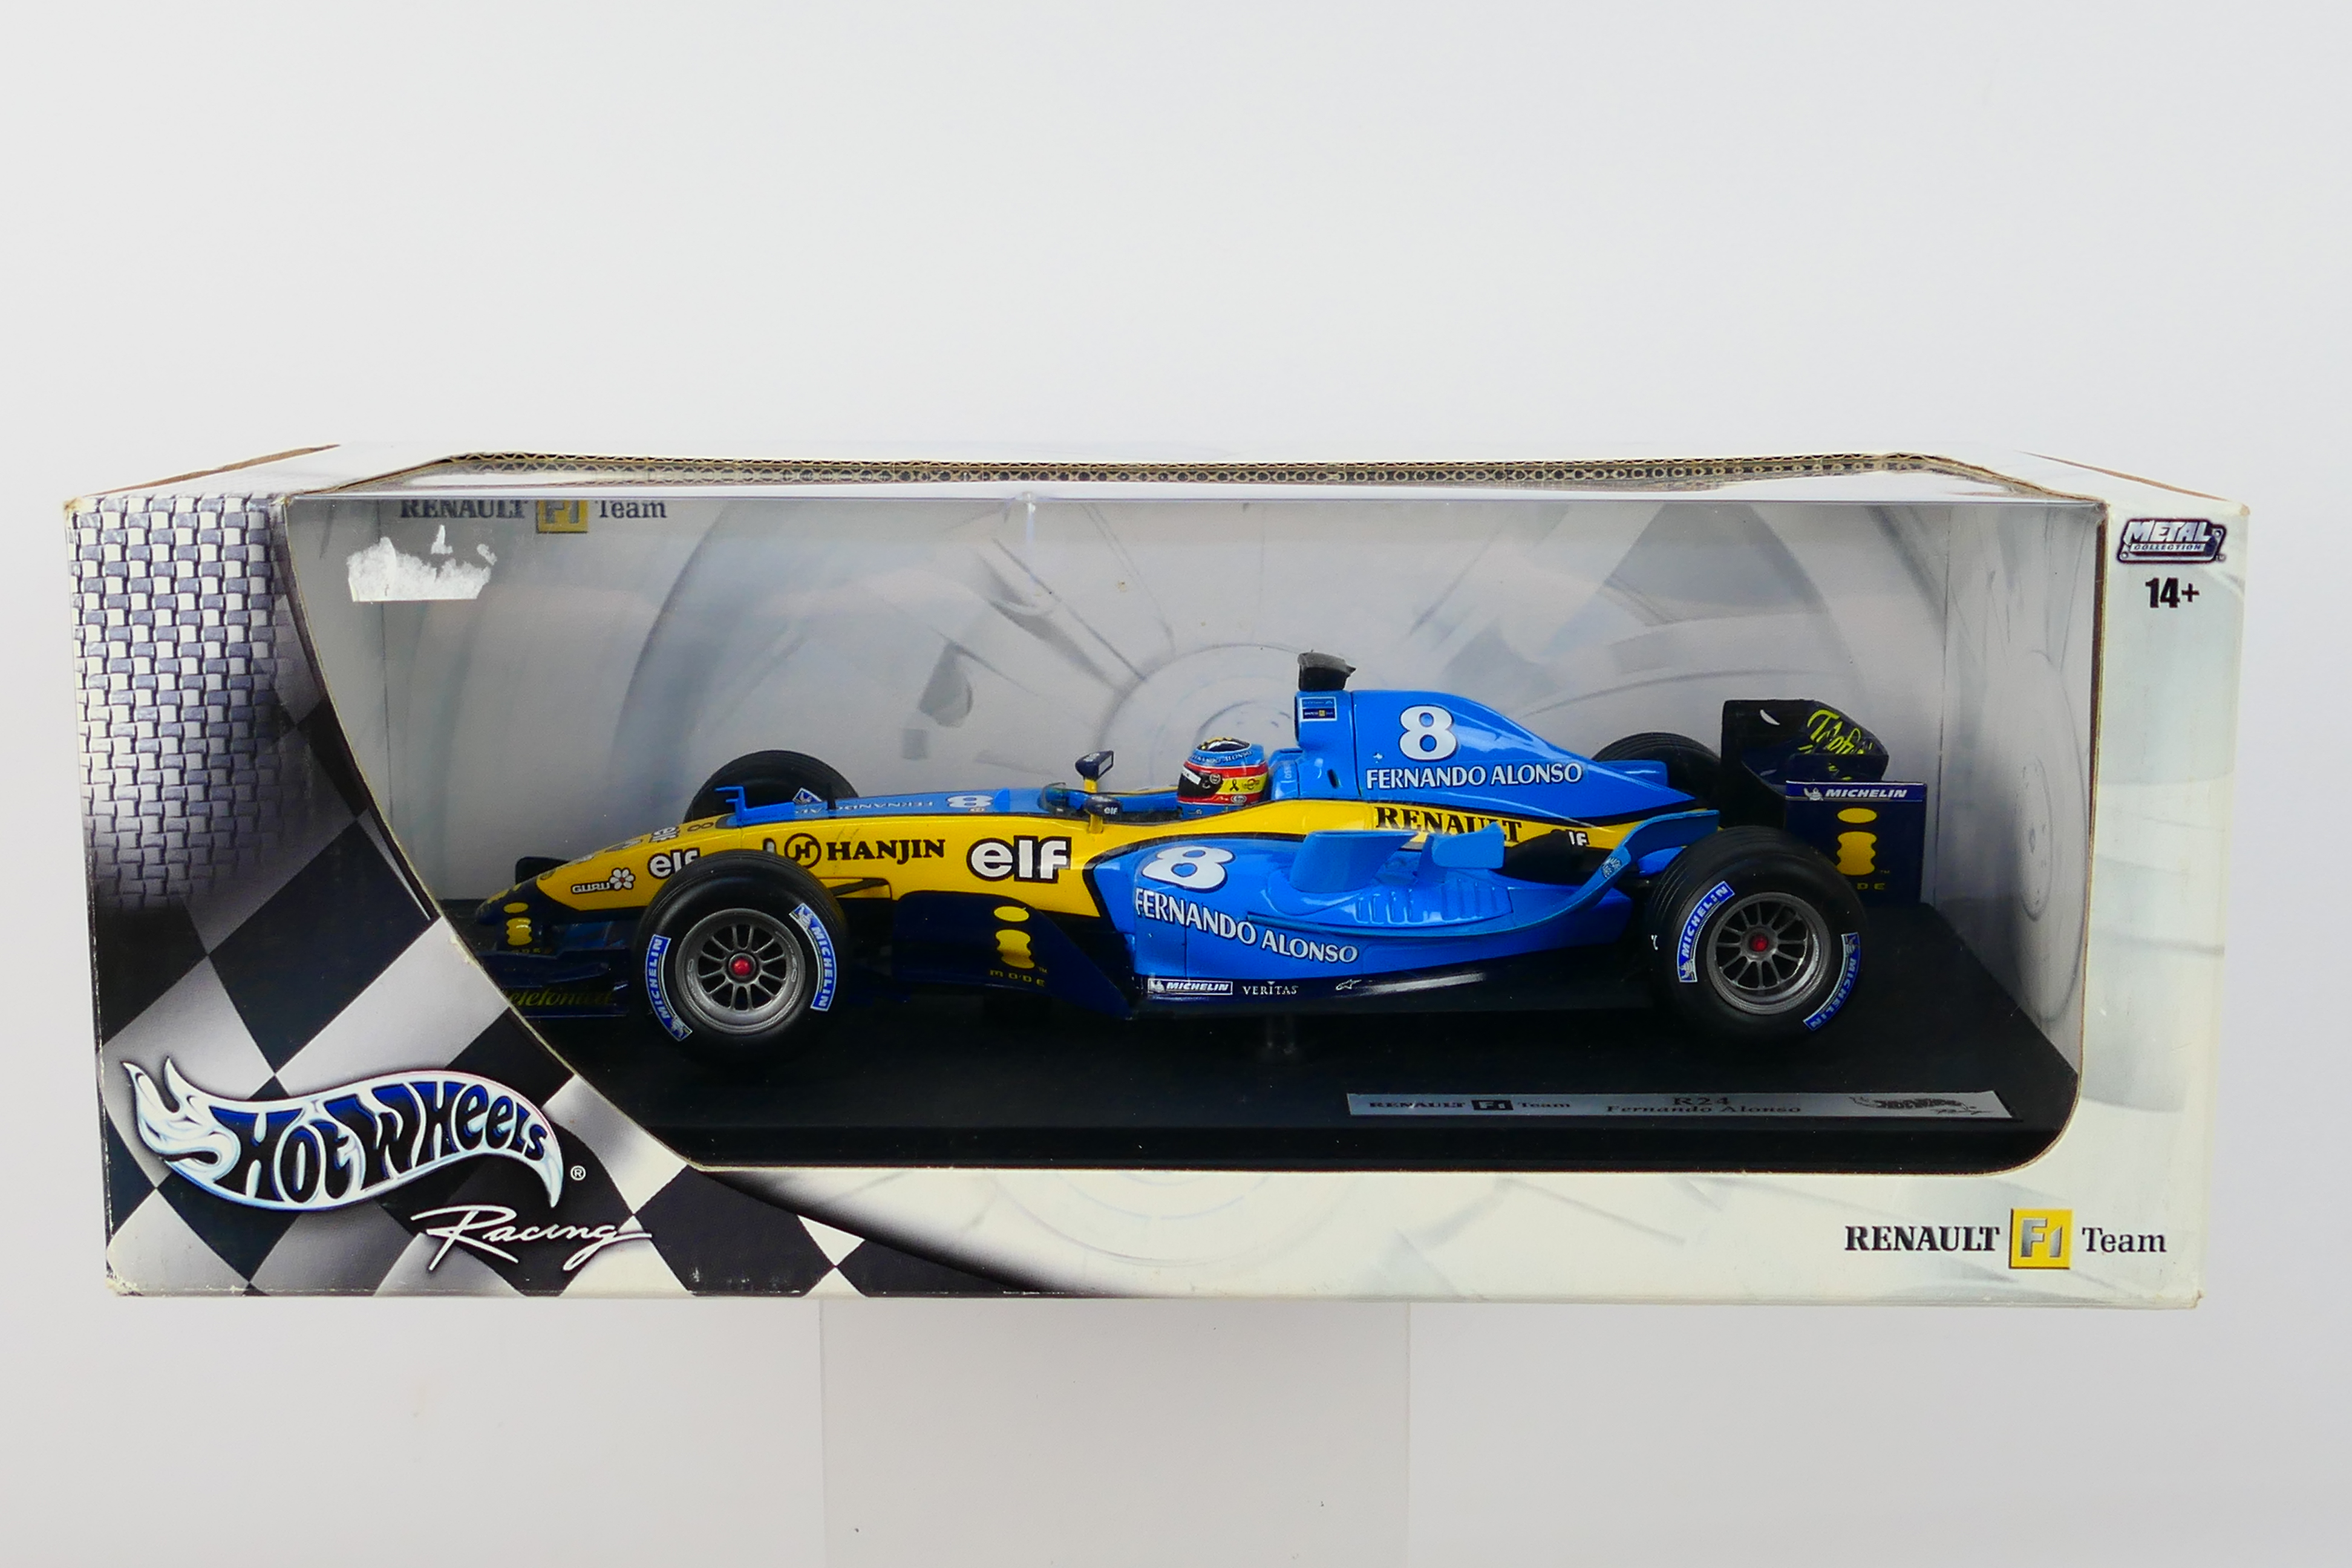 Hot Wheels - A boxed 1:18 scale Renault R24 Fernando Alonso car which appears Mint in a Good box